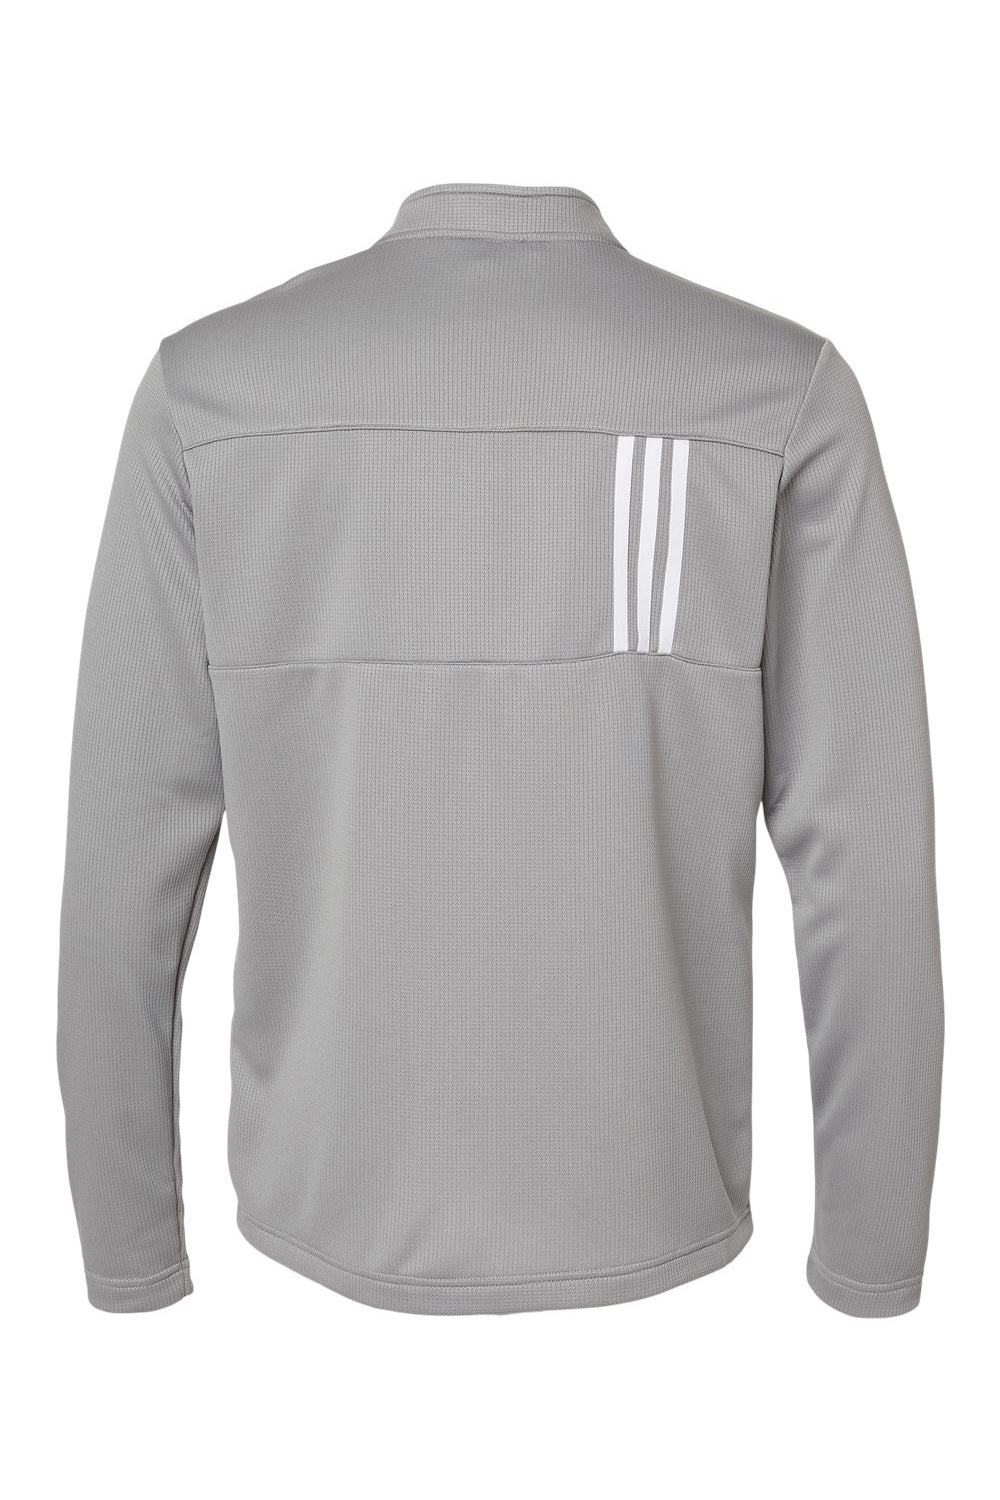 Adidas A482 Mens 3 Stripes Double Knit 1/4 Zip Pullover Grey/White Flat Back